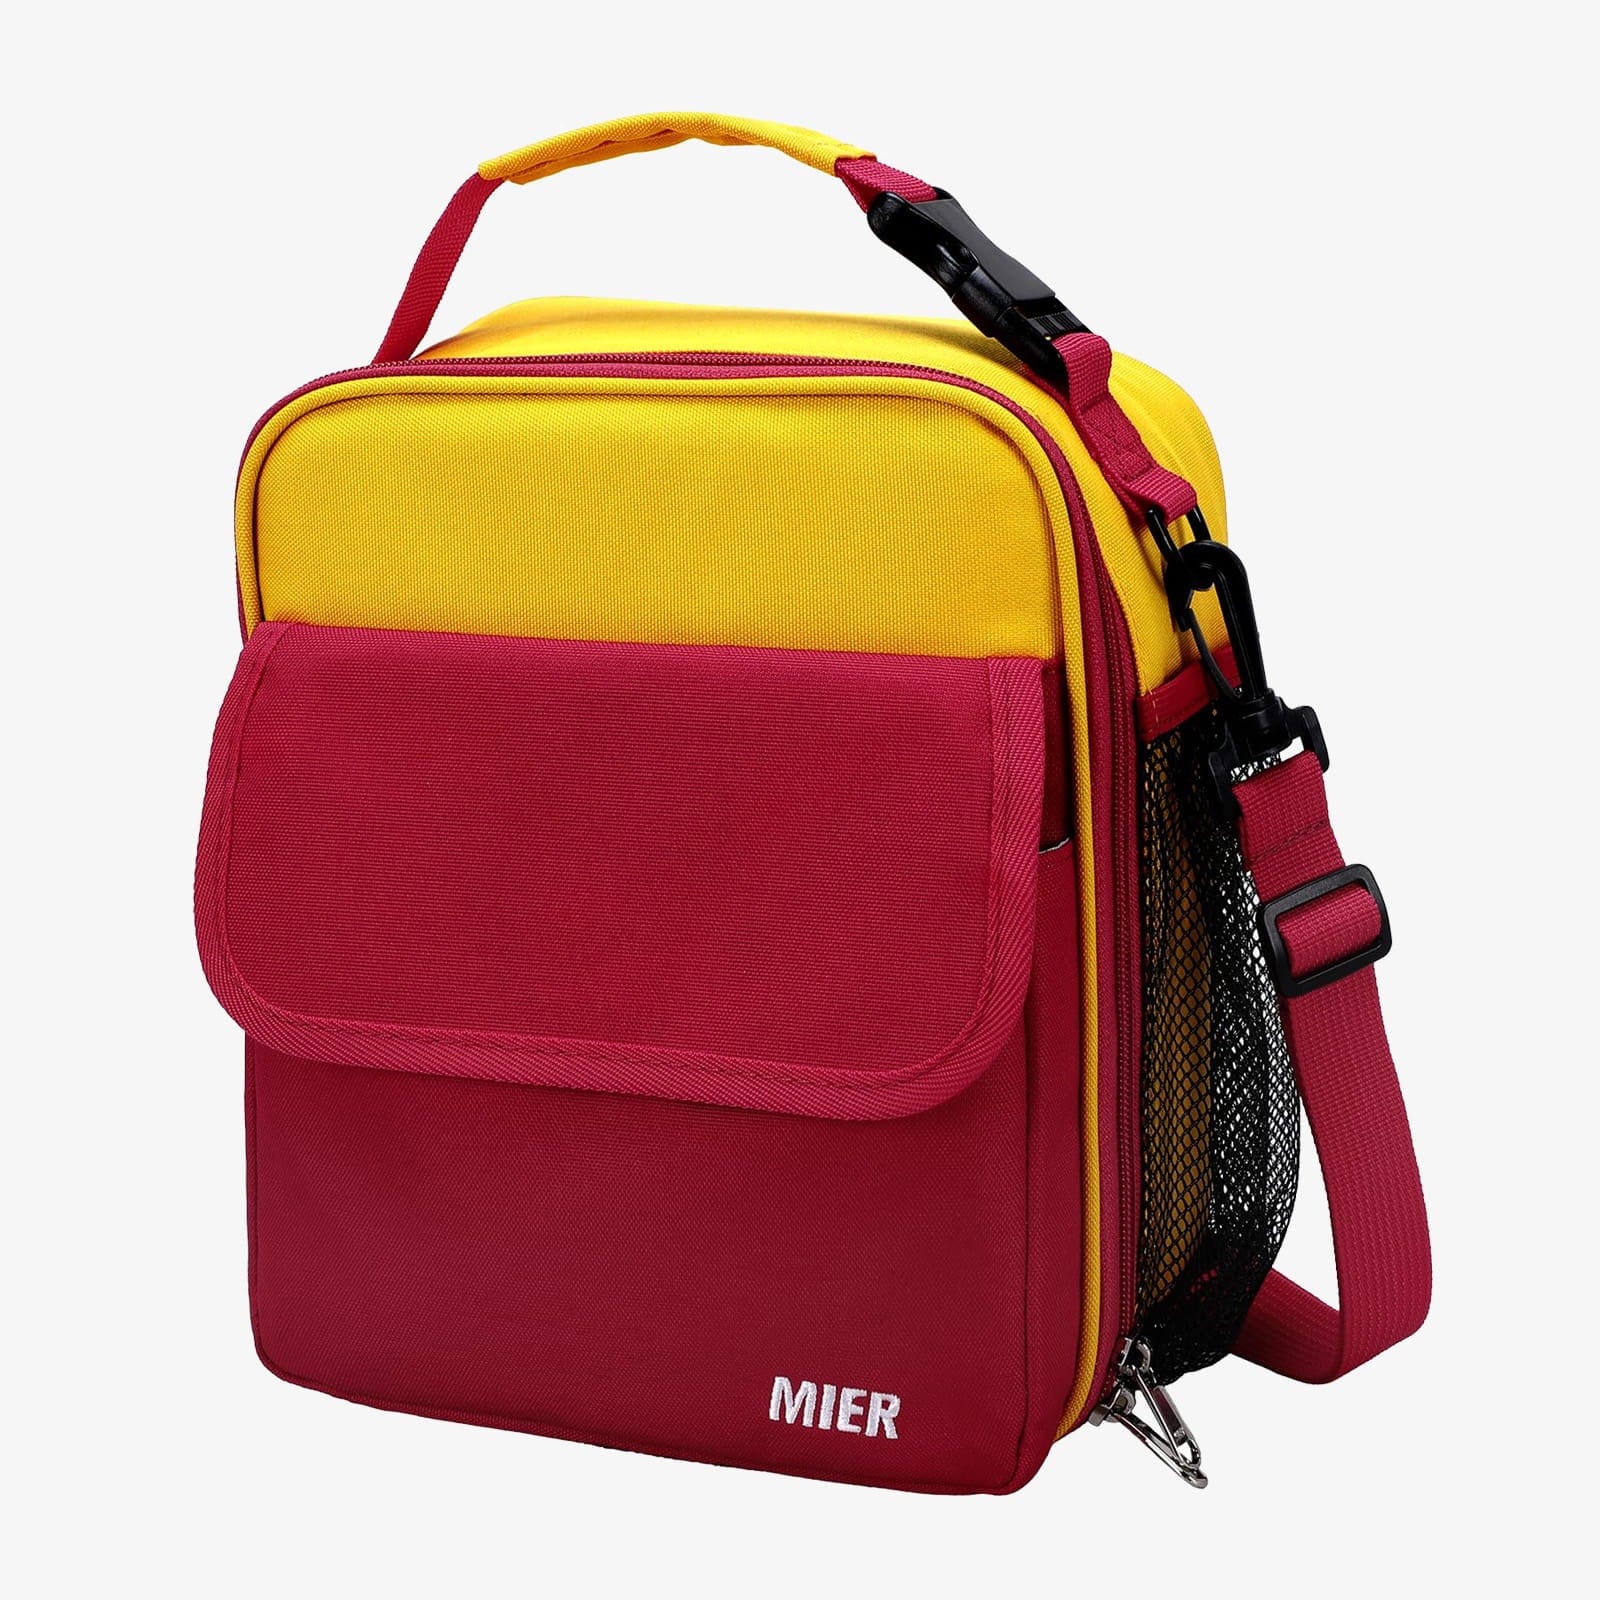 Insulated Lunchbox Bag Totes for Kids Kids Lunch Bag Yellow Red MIER